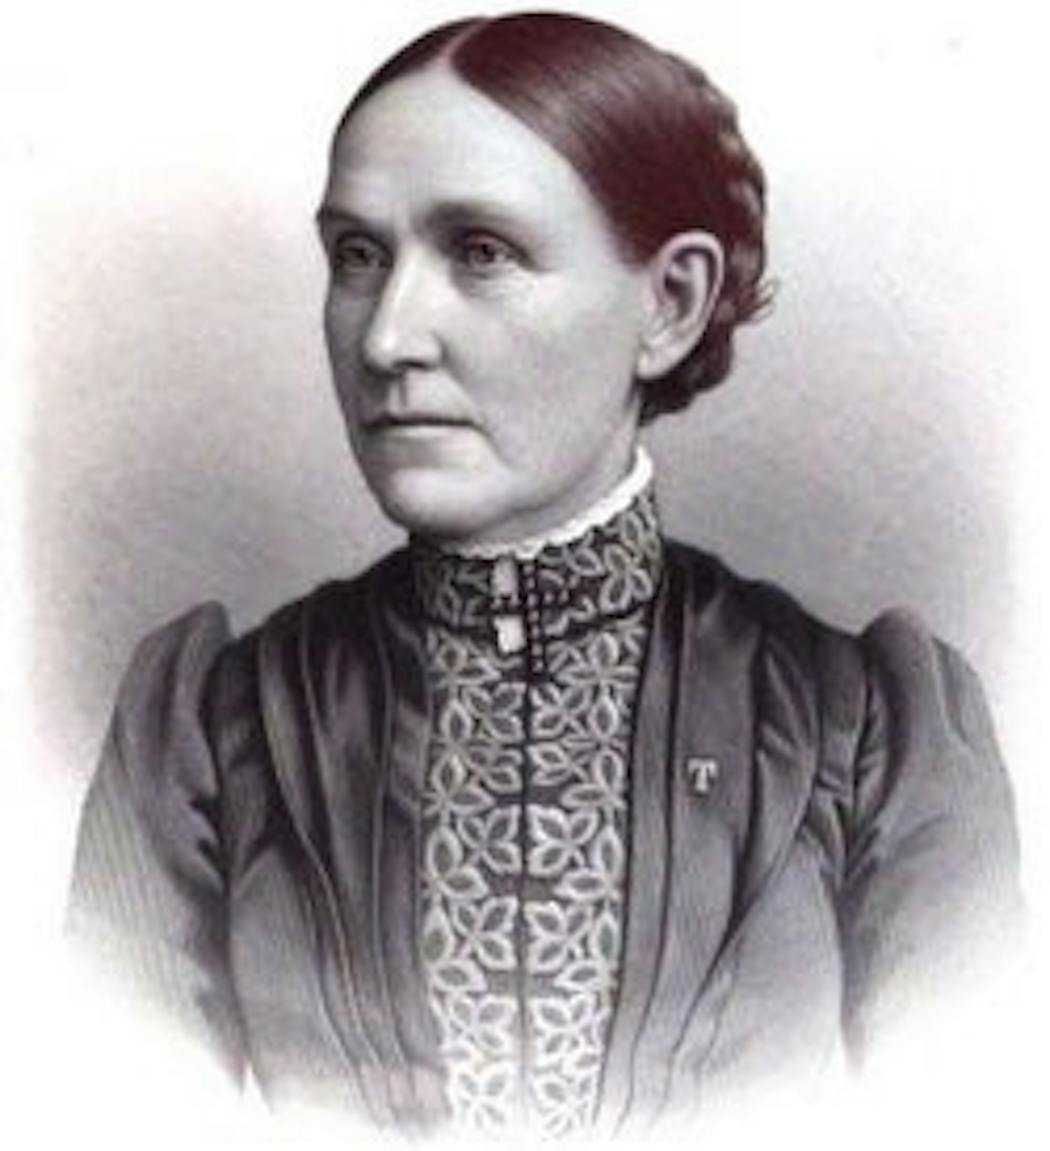 Harriet Walker, from “History of the City of Minneapolis, Minnesota” by Isaac Atwater, 1893.